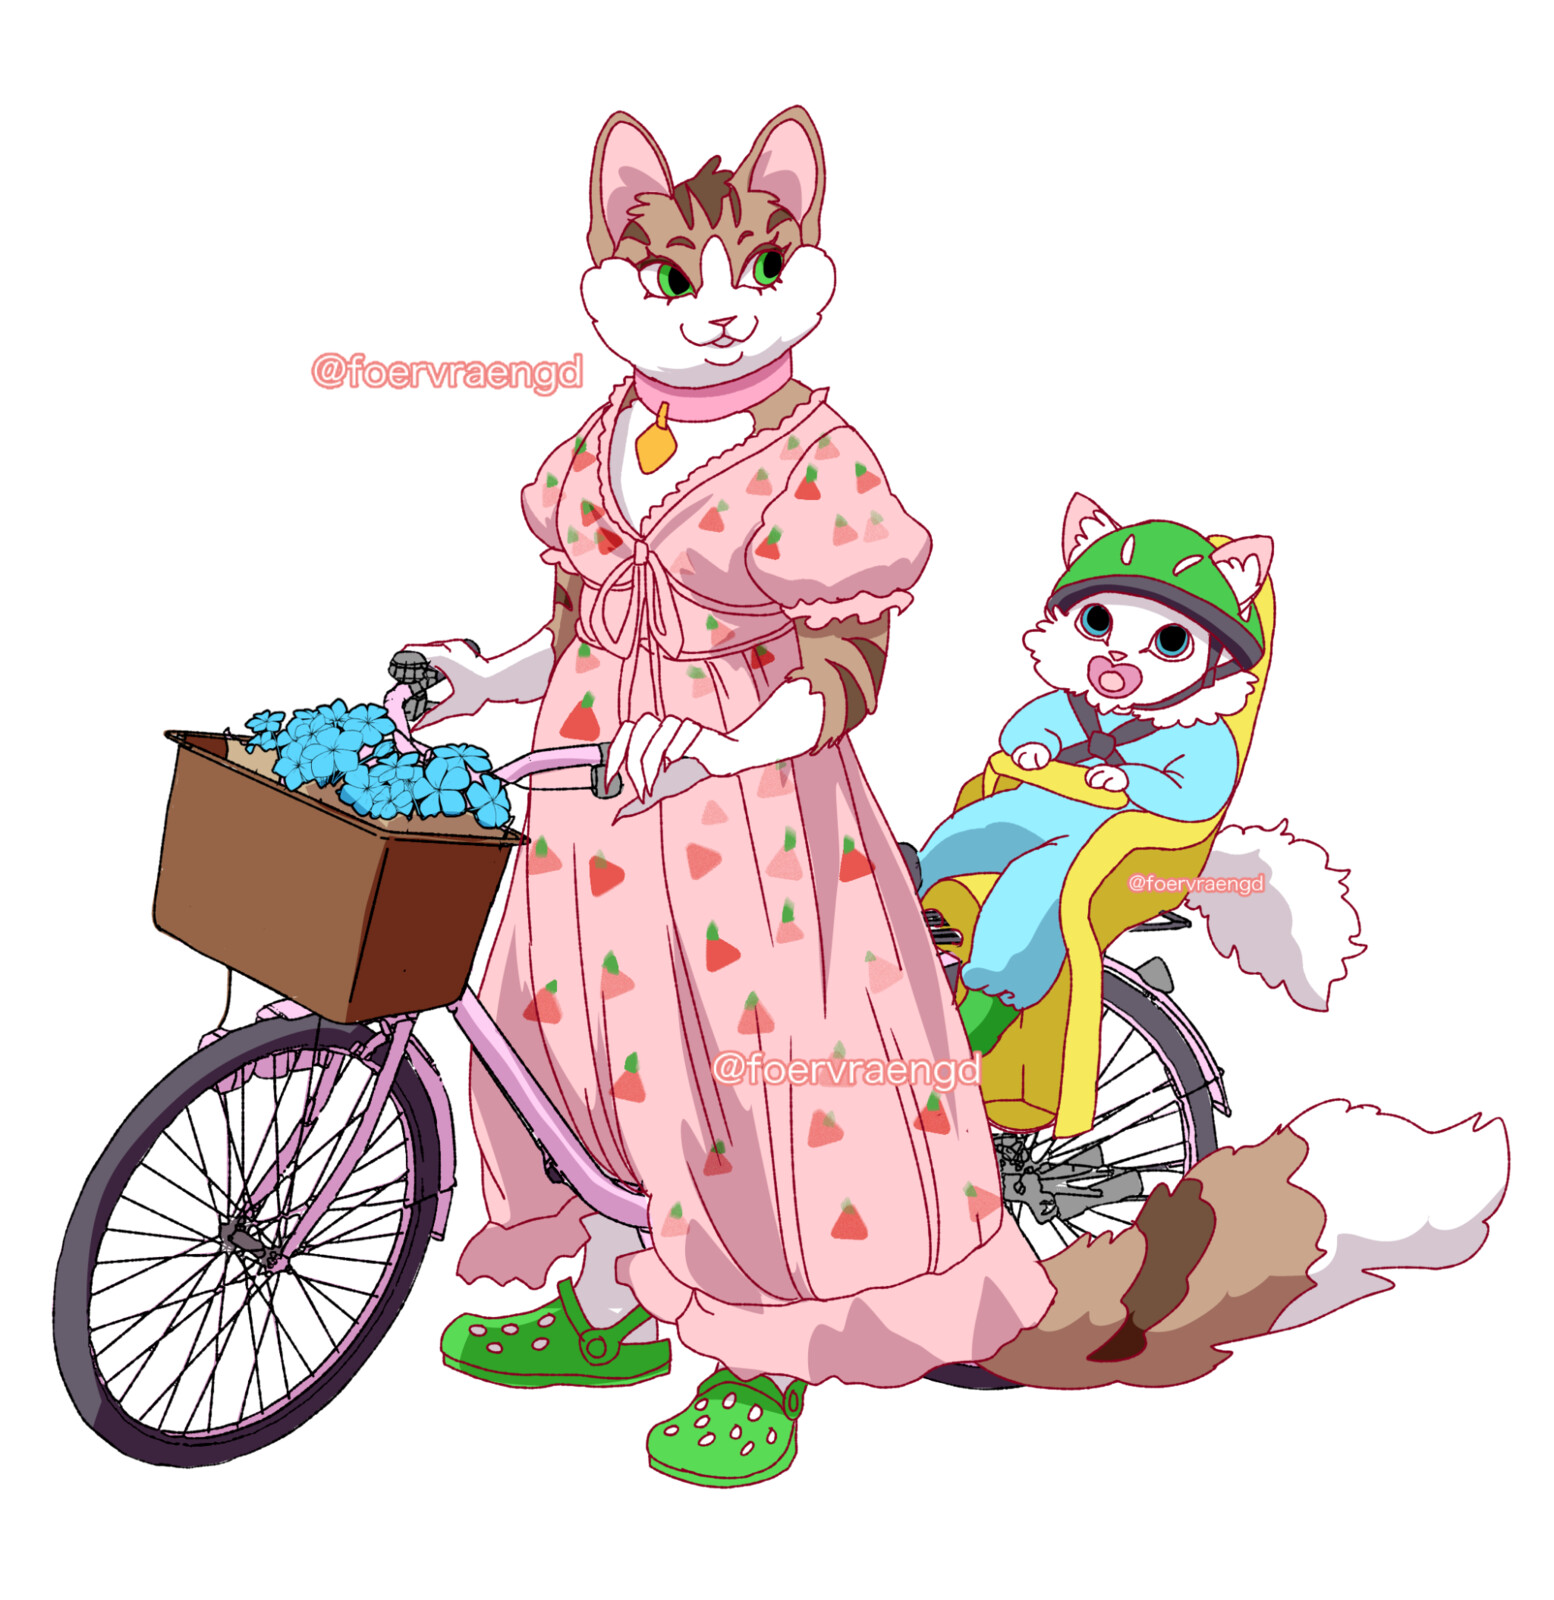 Firestars sister Princess, not part of any clan so she rides on a mommy bike with her baby instead.